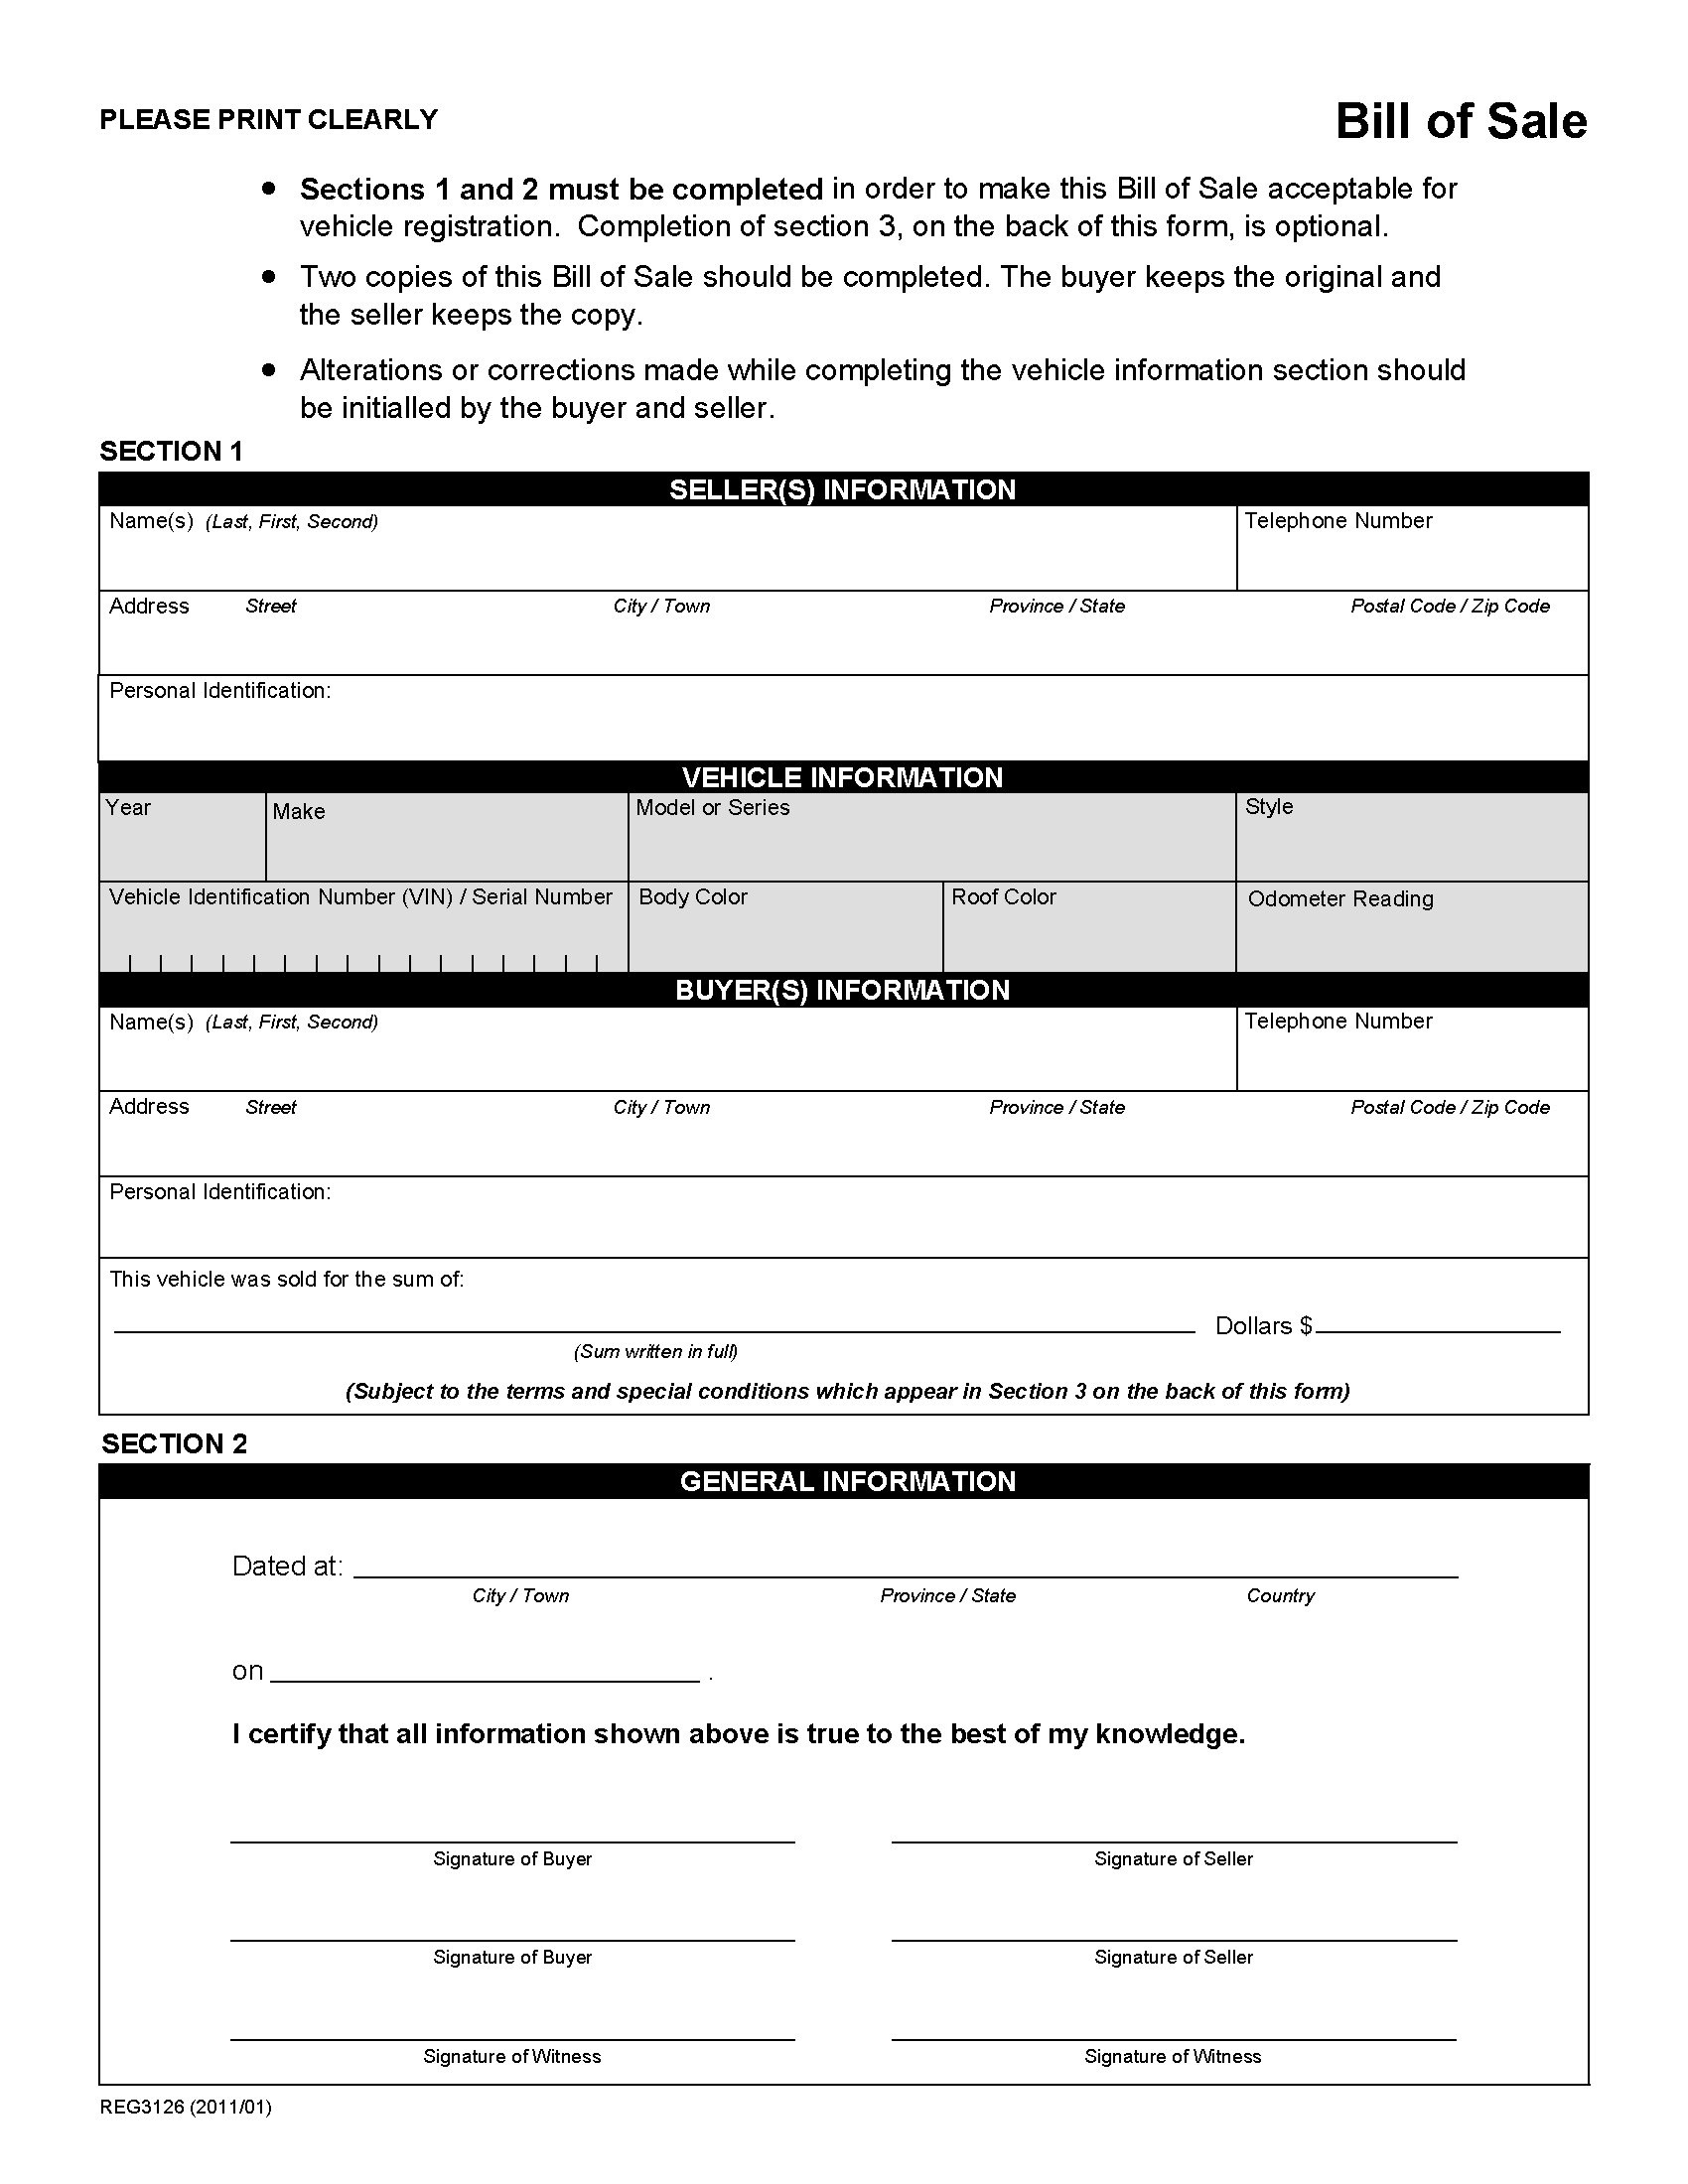 Bill Of Sale Form Template Vehicle [Printable] | Site Provides - Free Printable Blank Auto Bill Of Sale